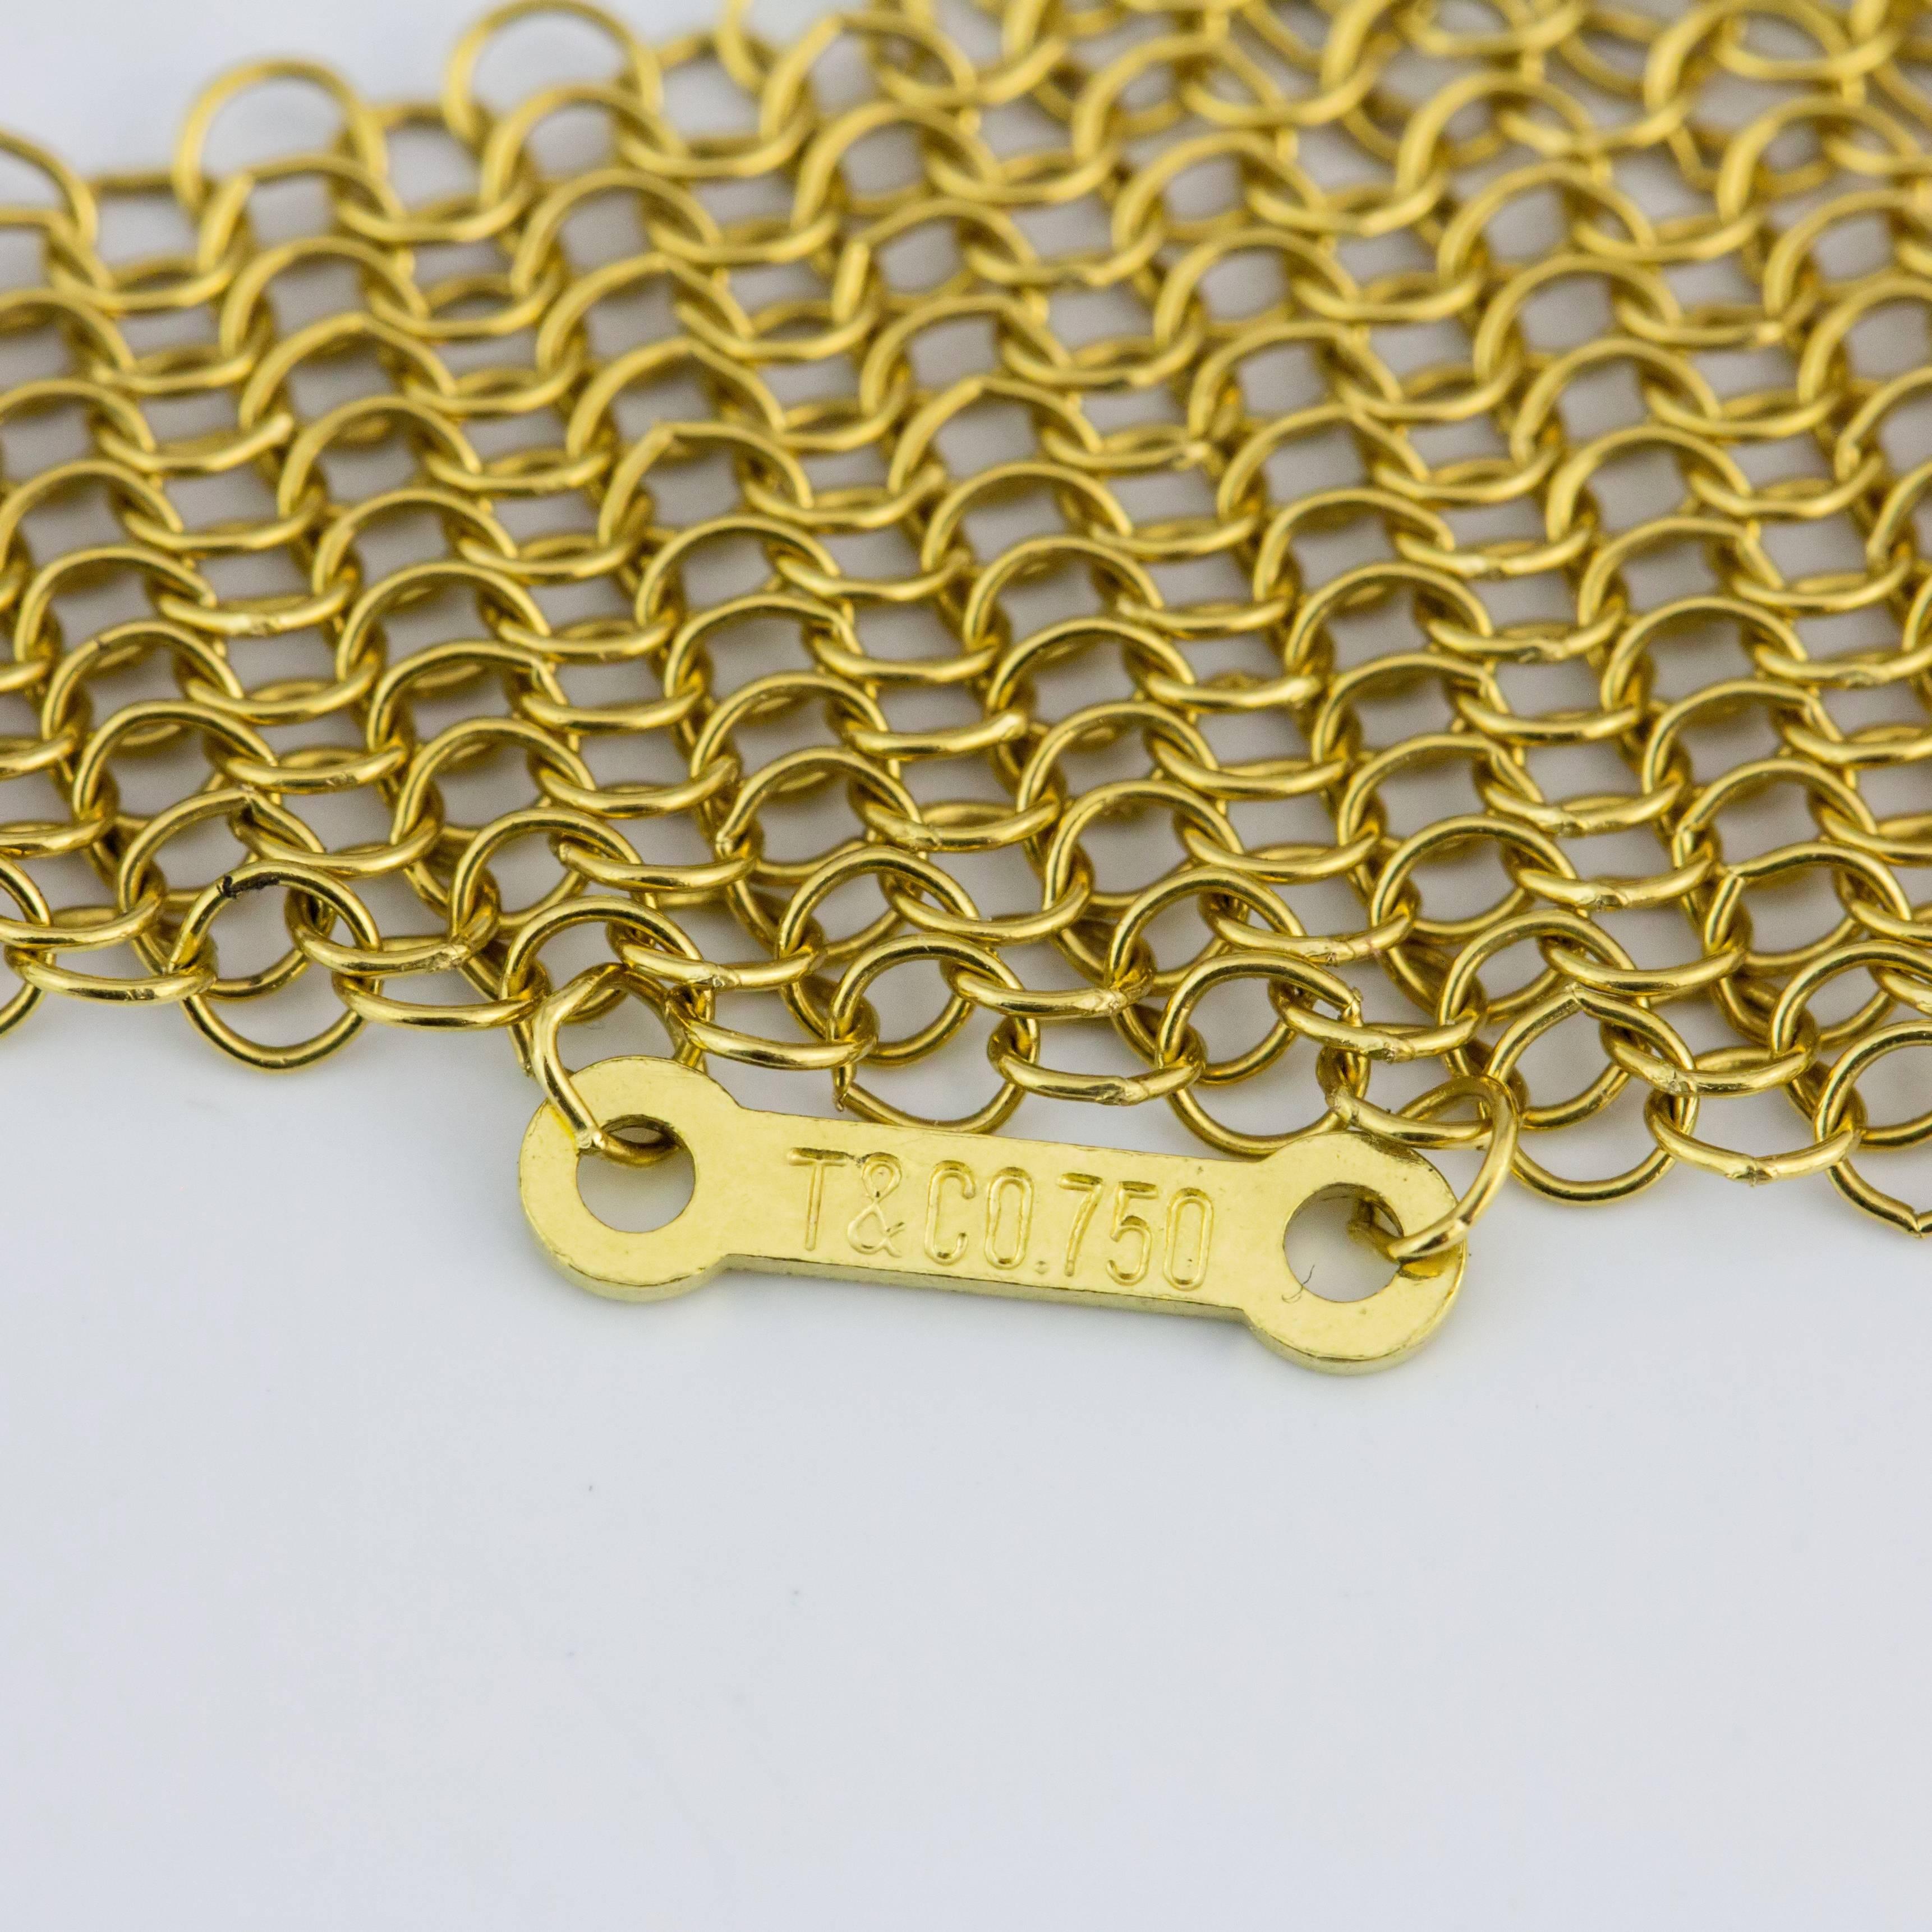 gold mesh scarf necklace